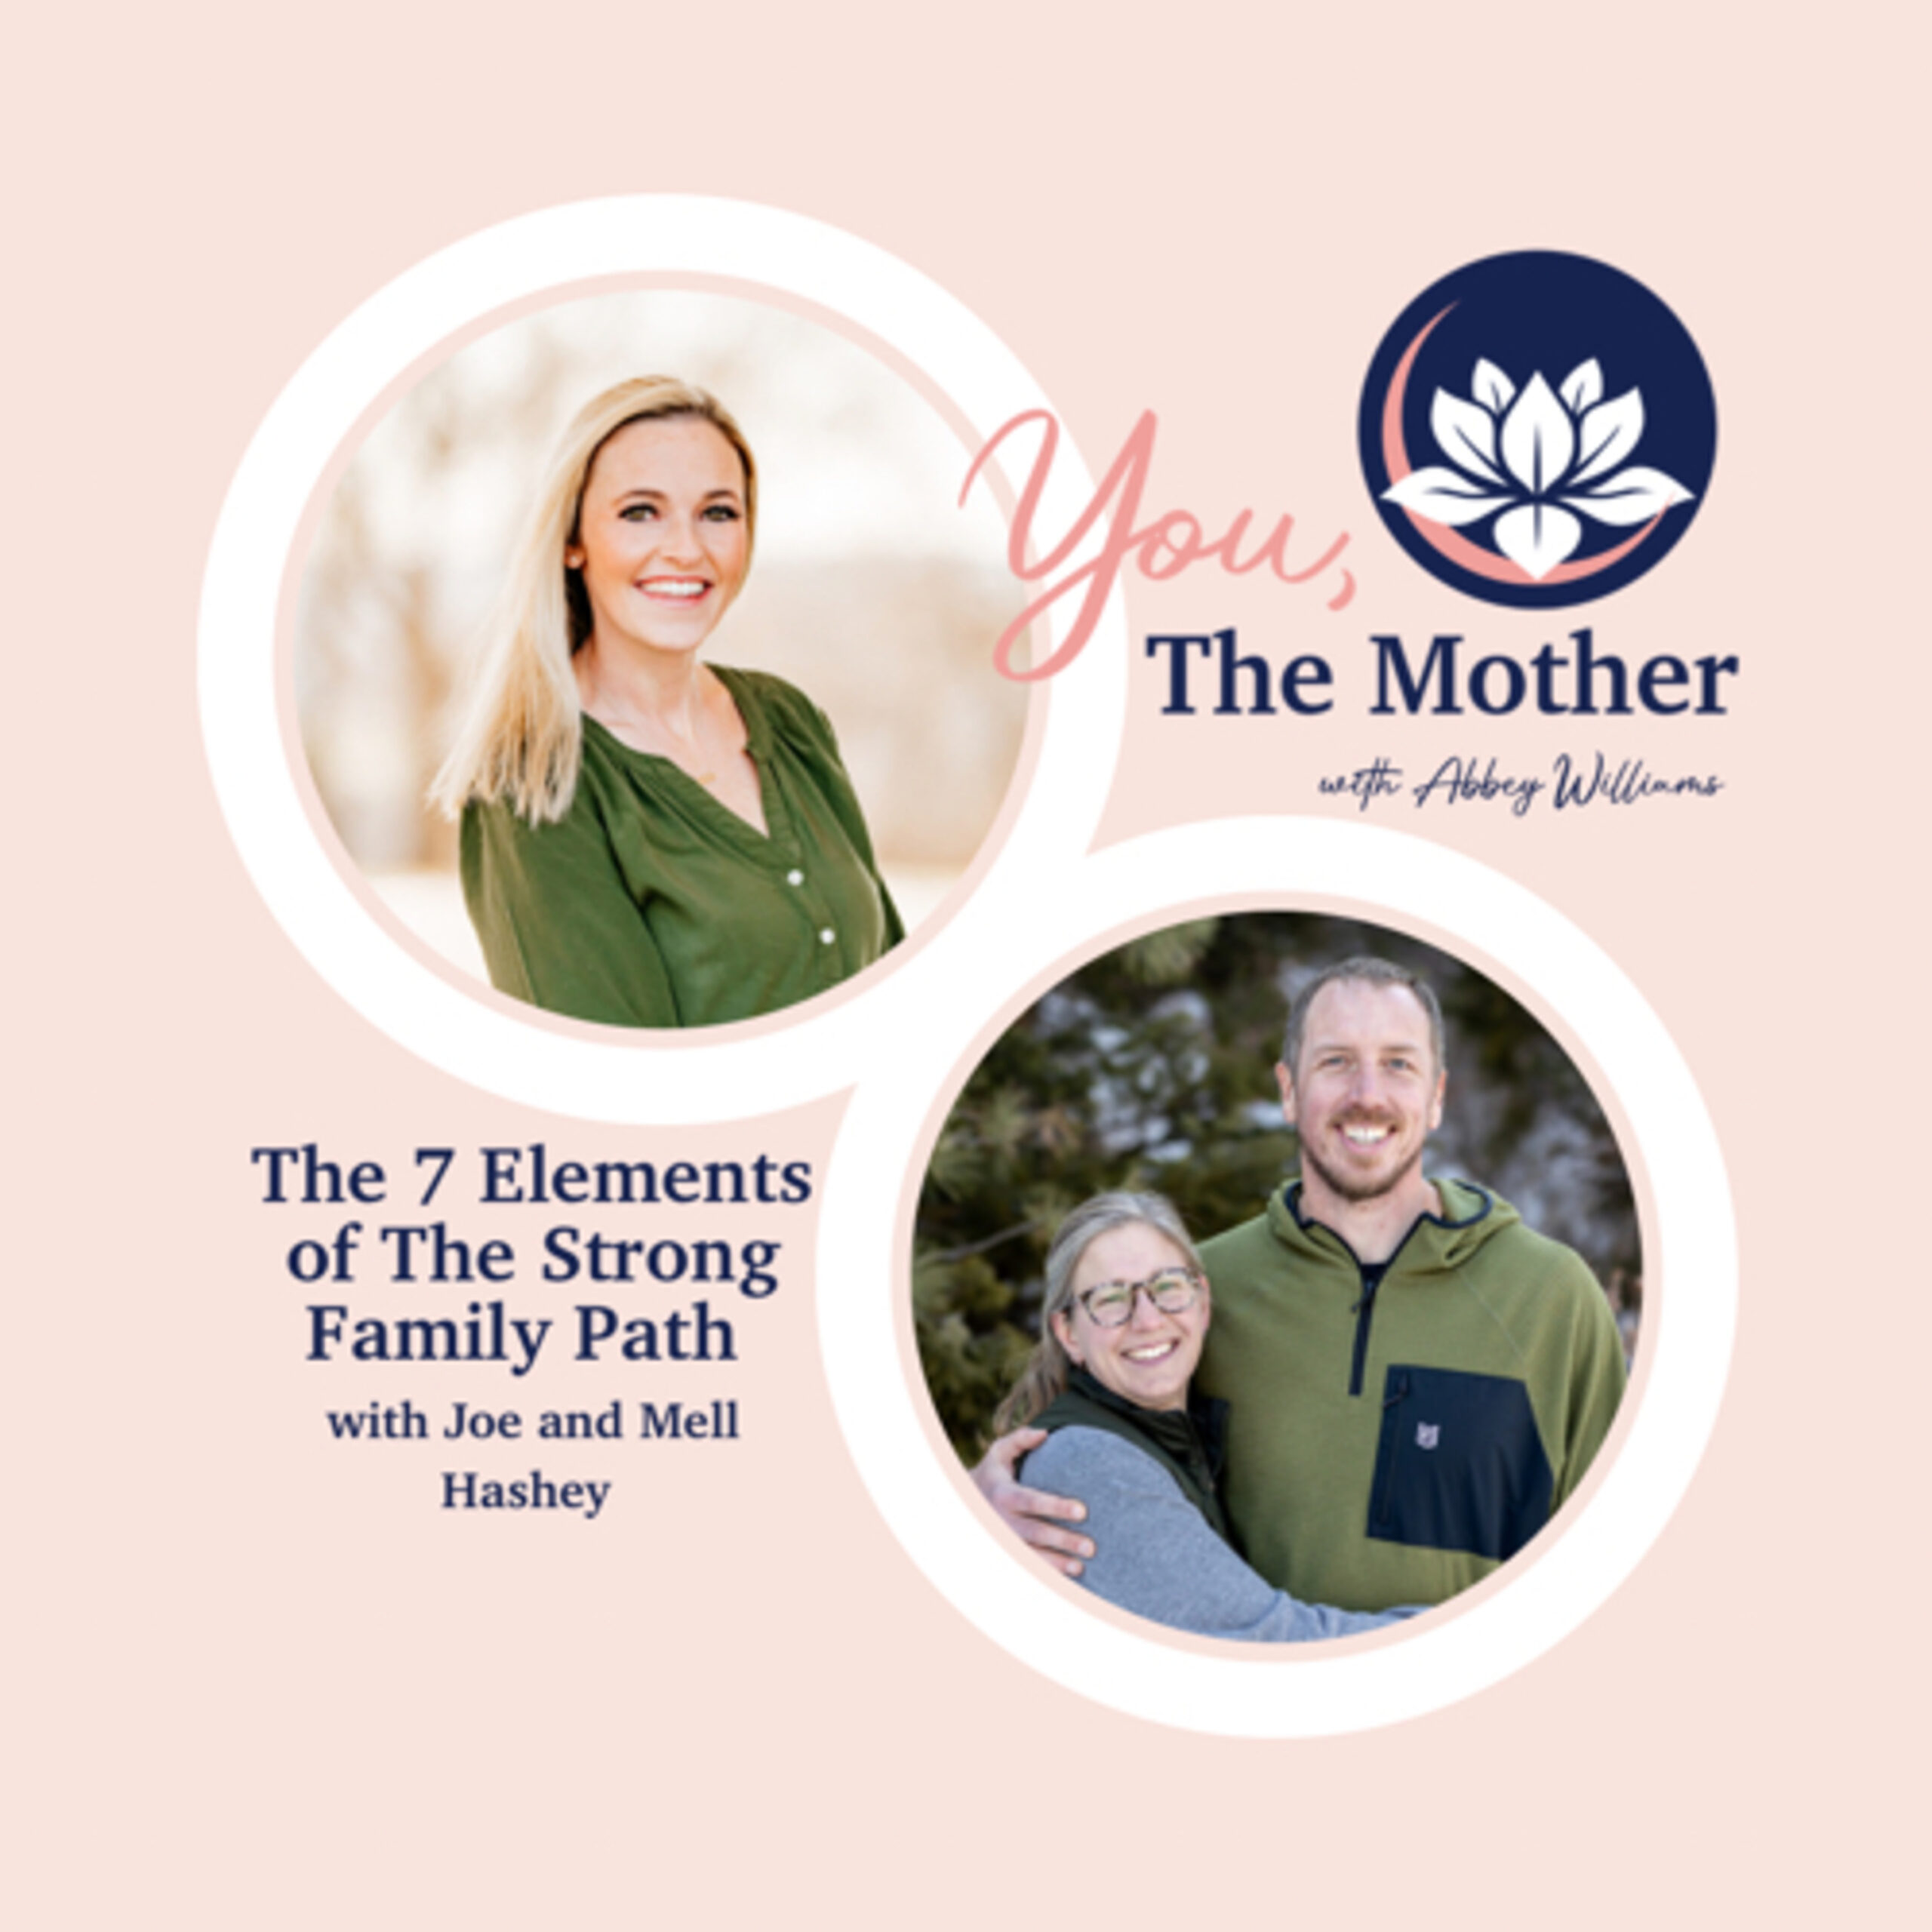 The 7 Elements of The Strong Family Path with Joe and Mell Hashey